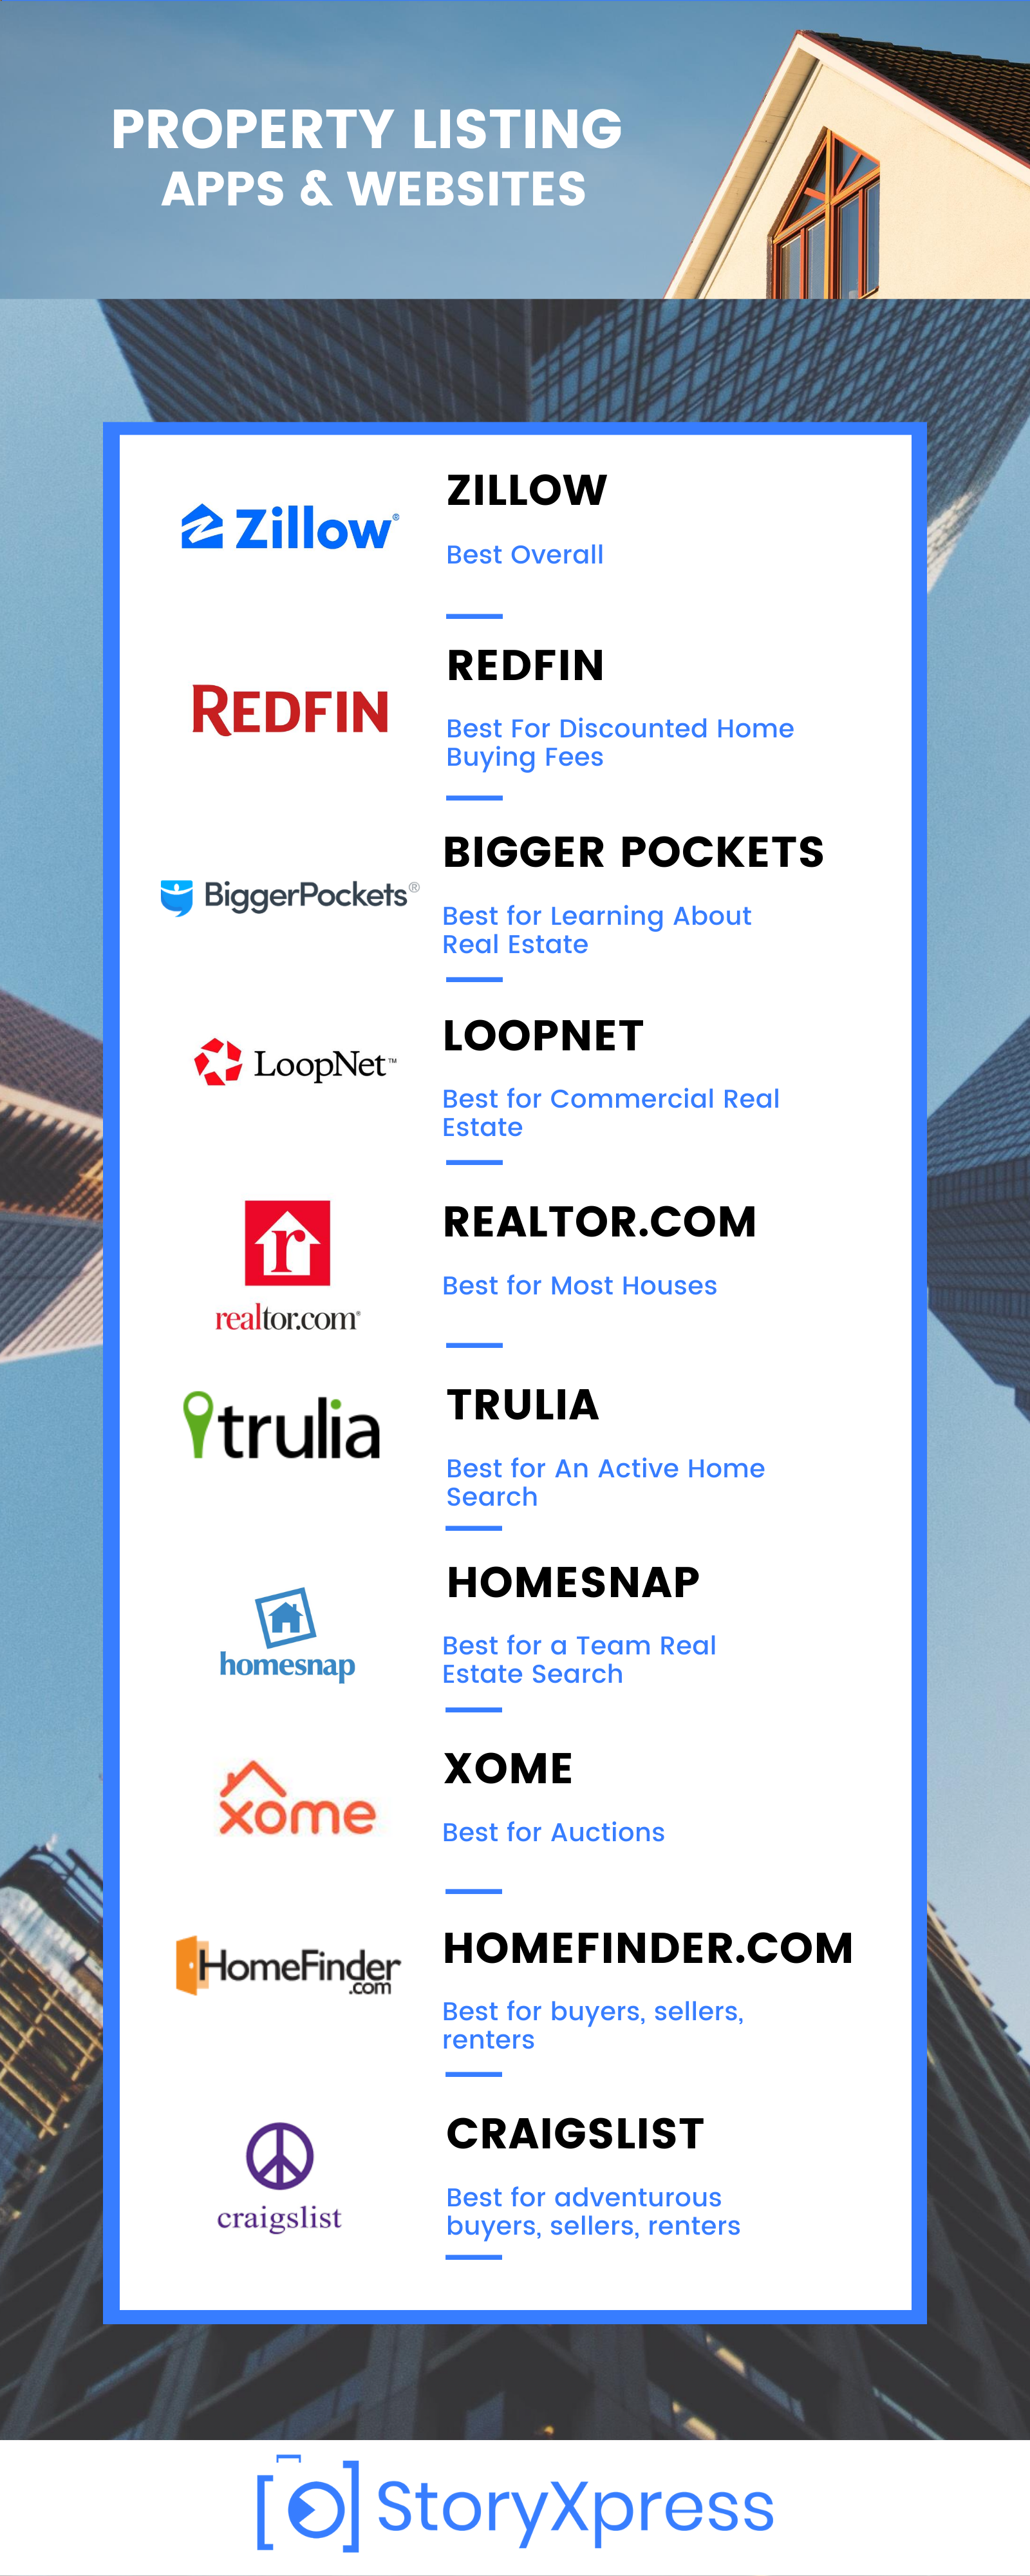 Property Listing Apps & Websites- Infographic